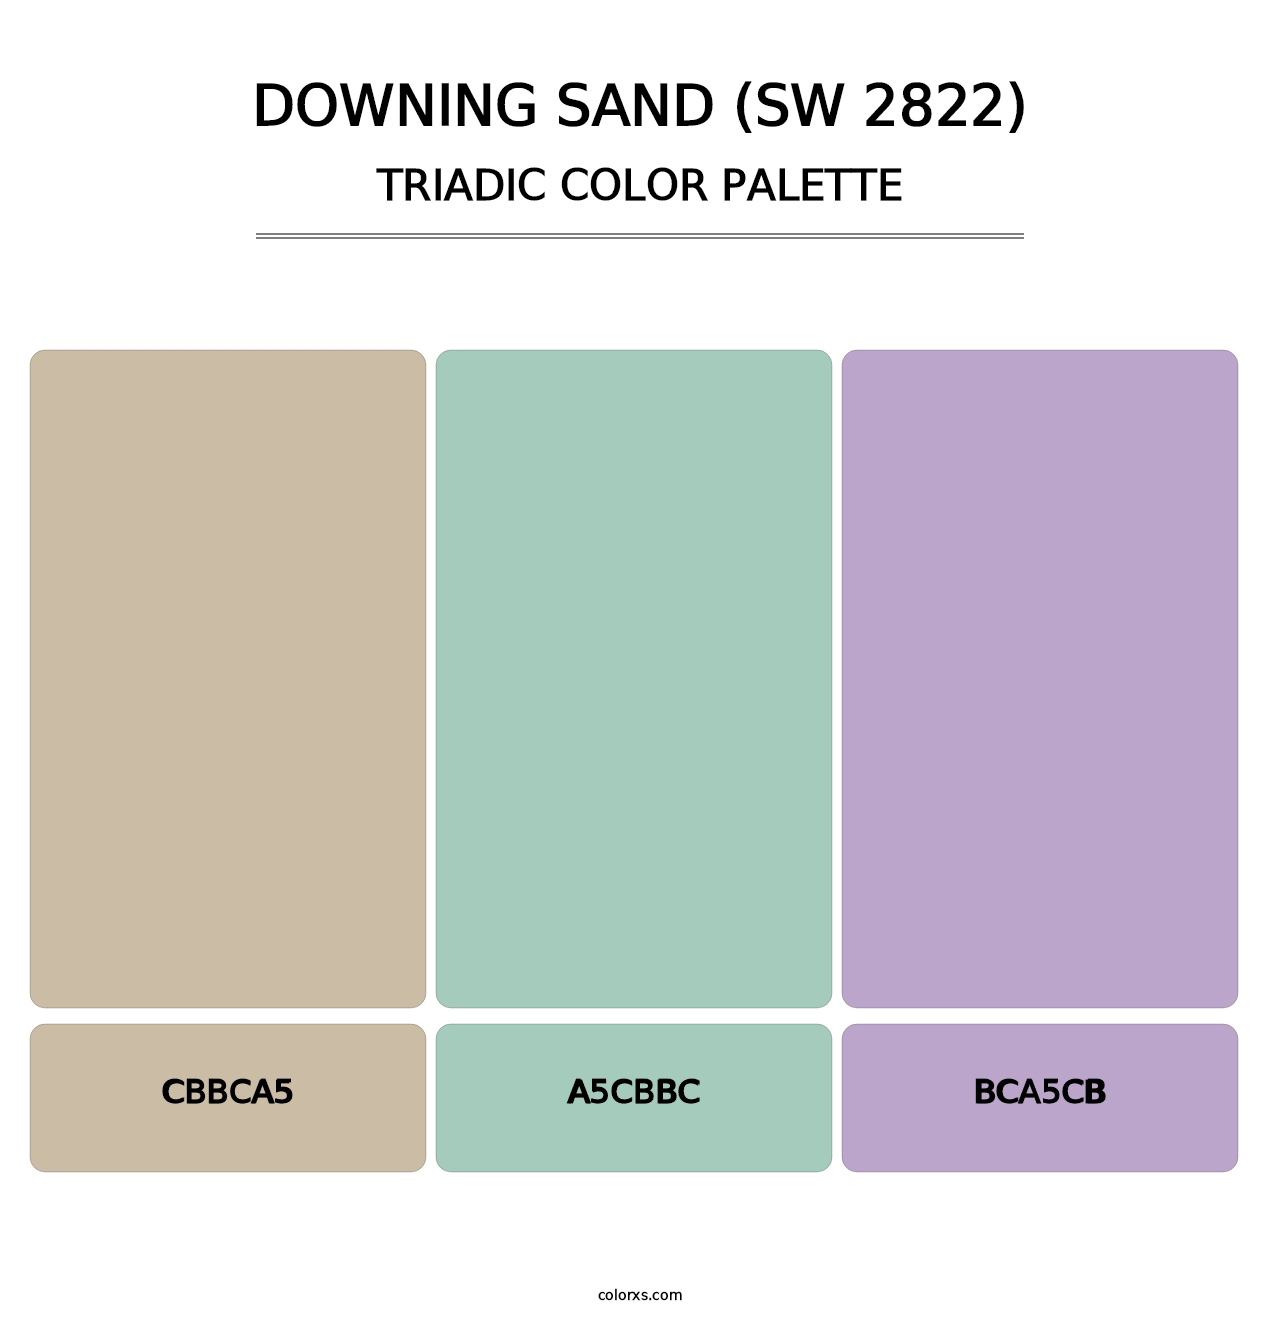 Downing Sand (SW 2822) - Triadic Color Palette